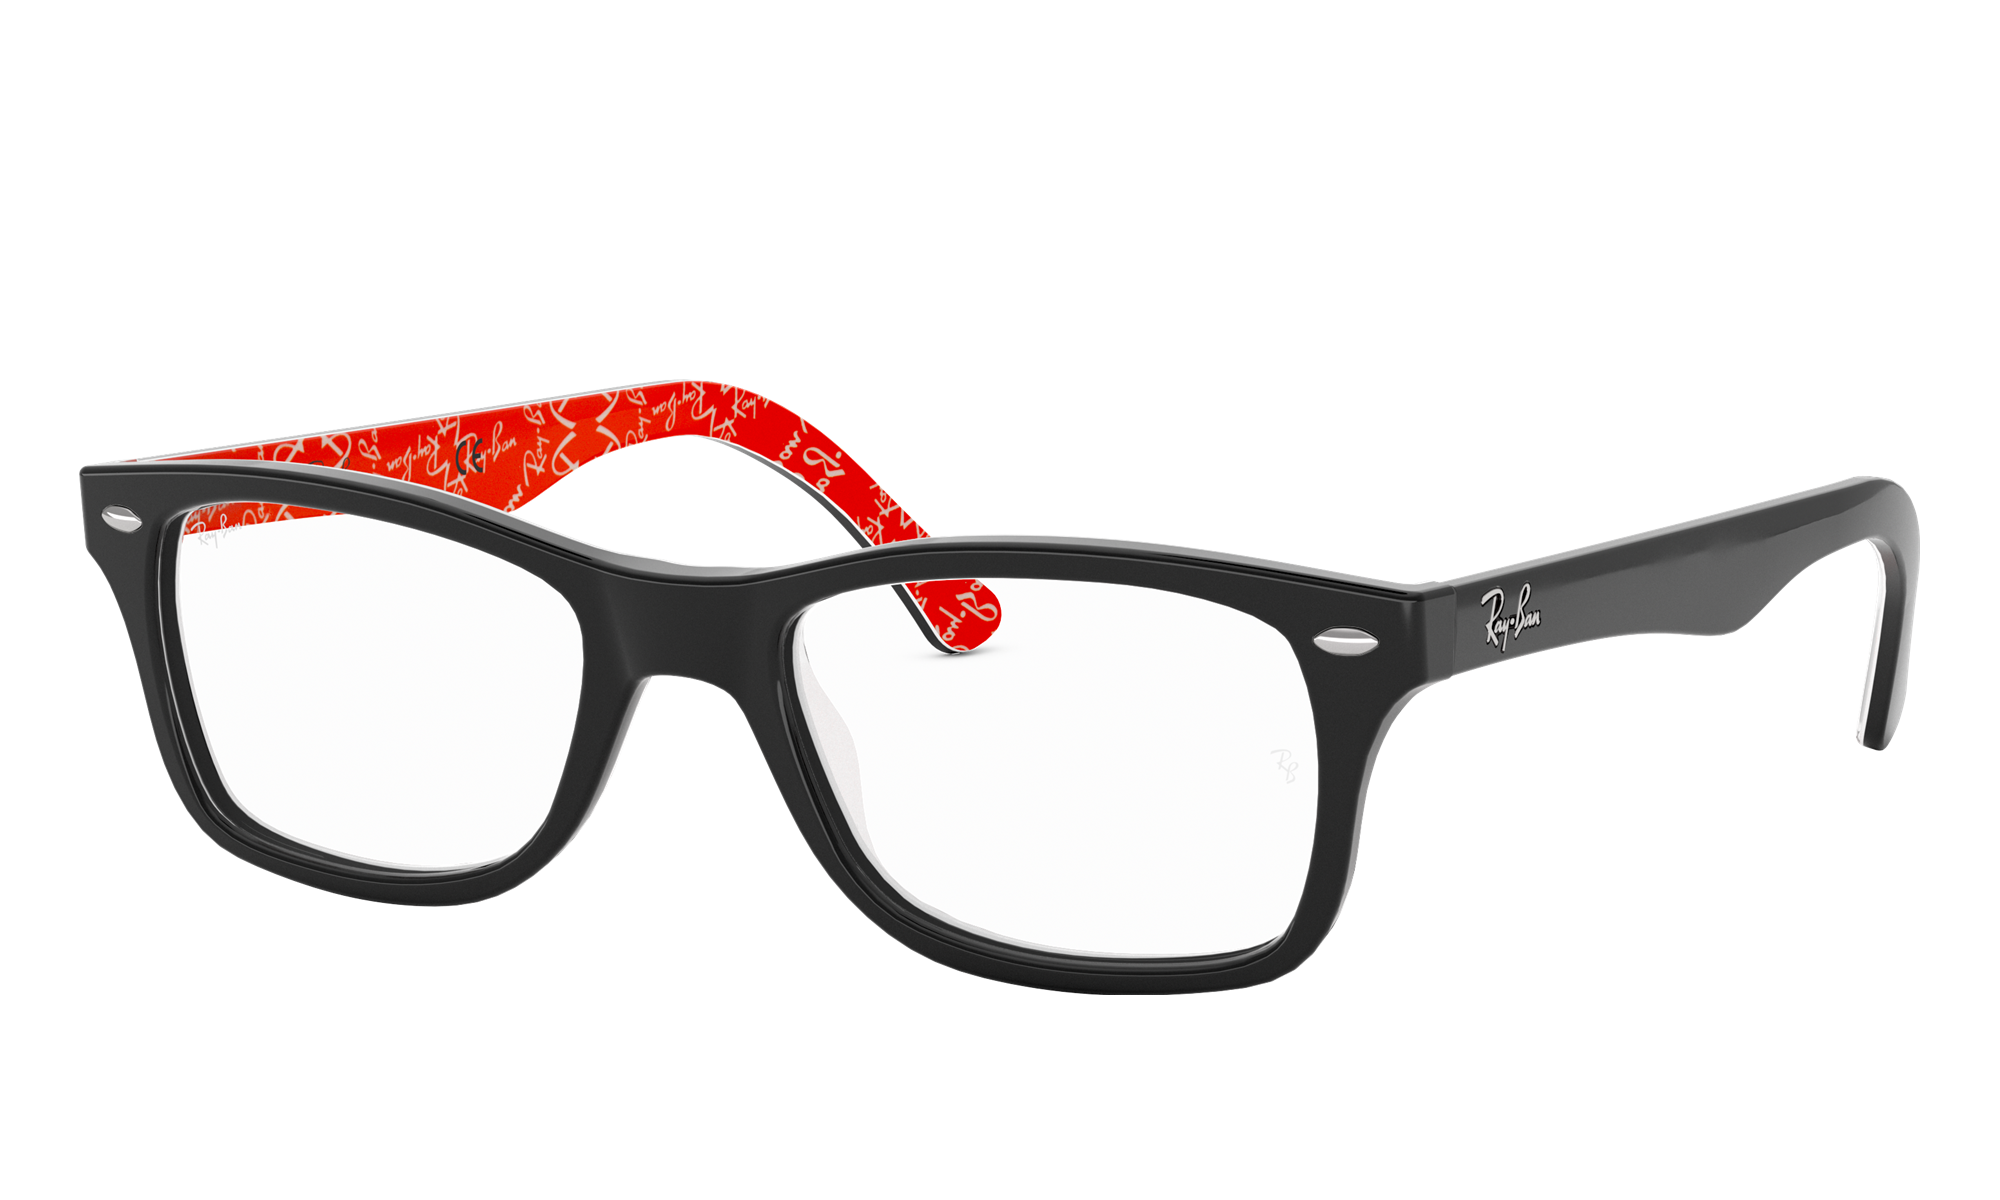 Ray-Ban Unisex Rx5228 Black On Red Size: Extra Small